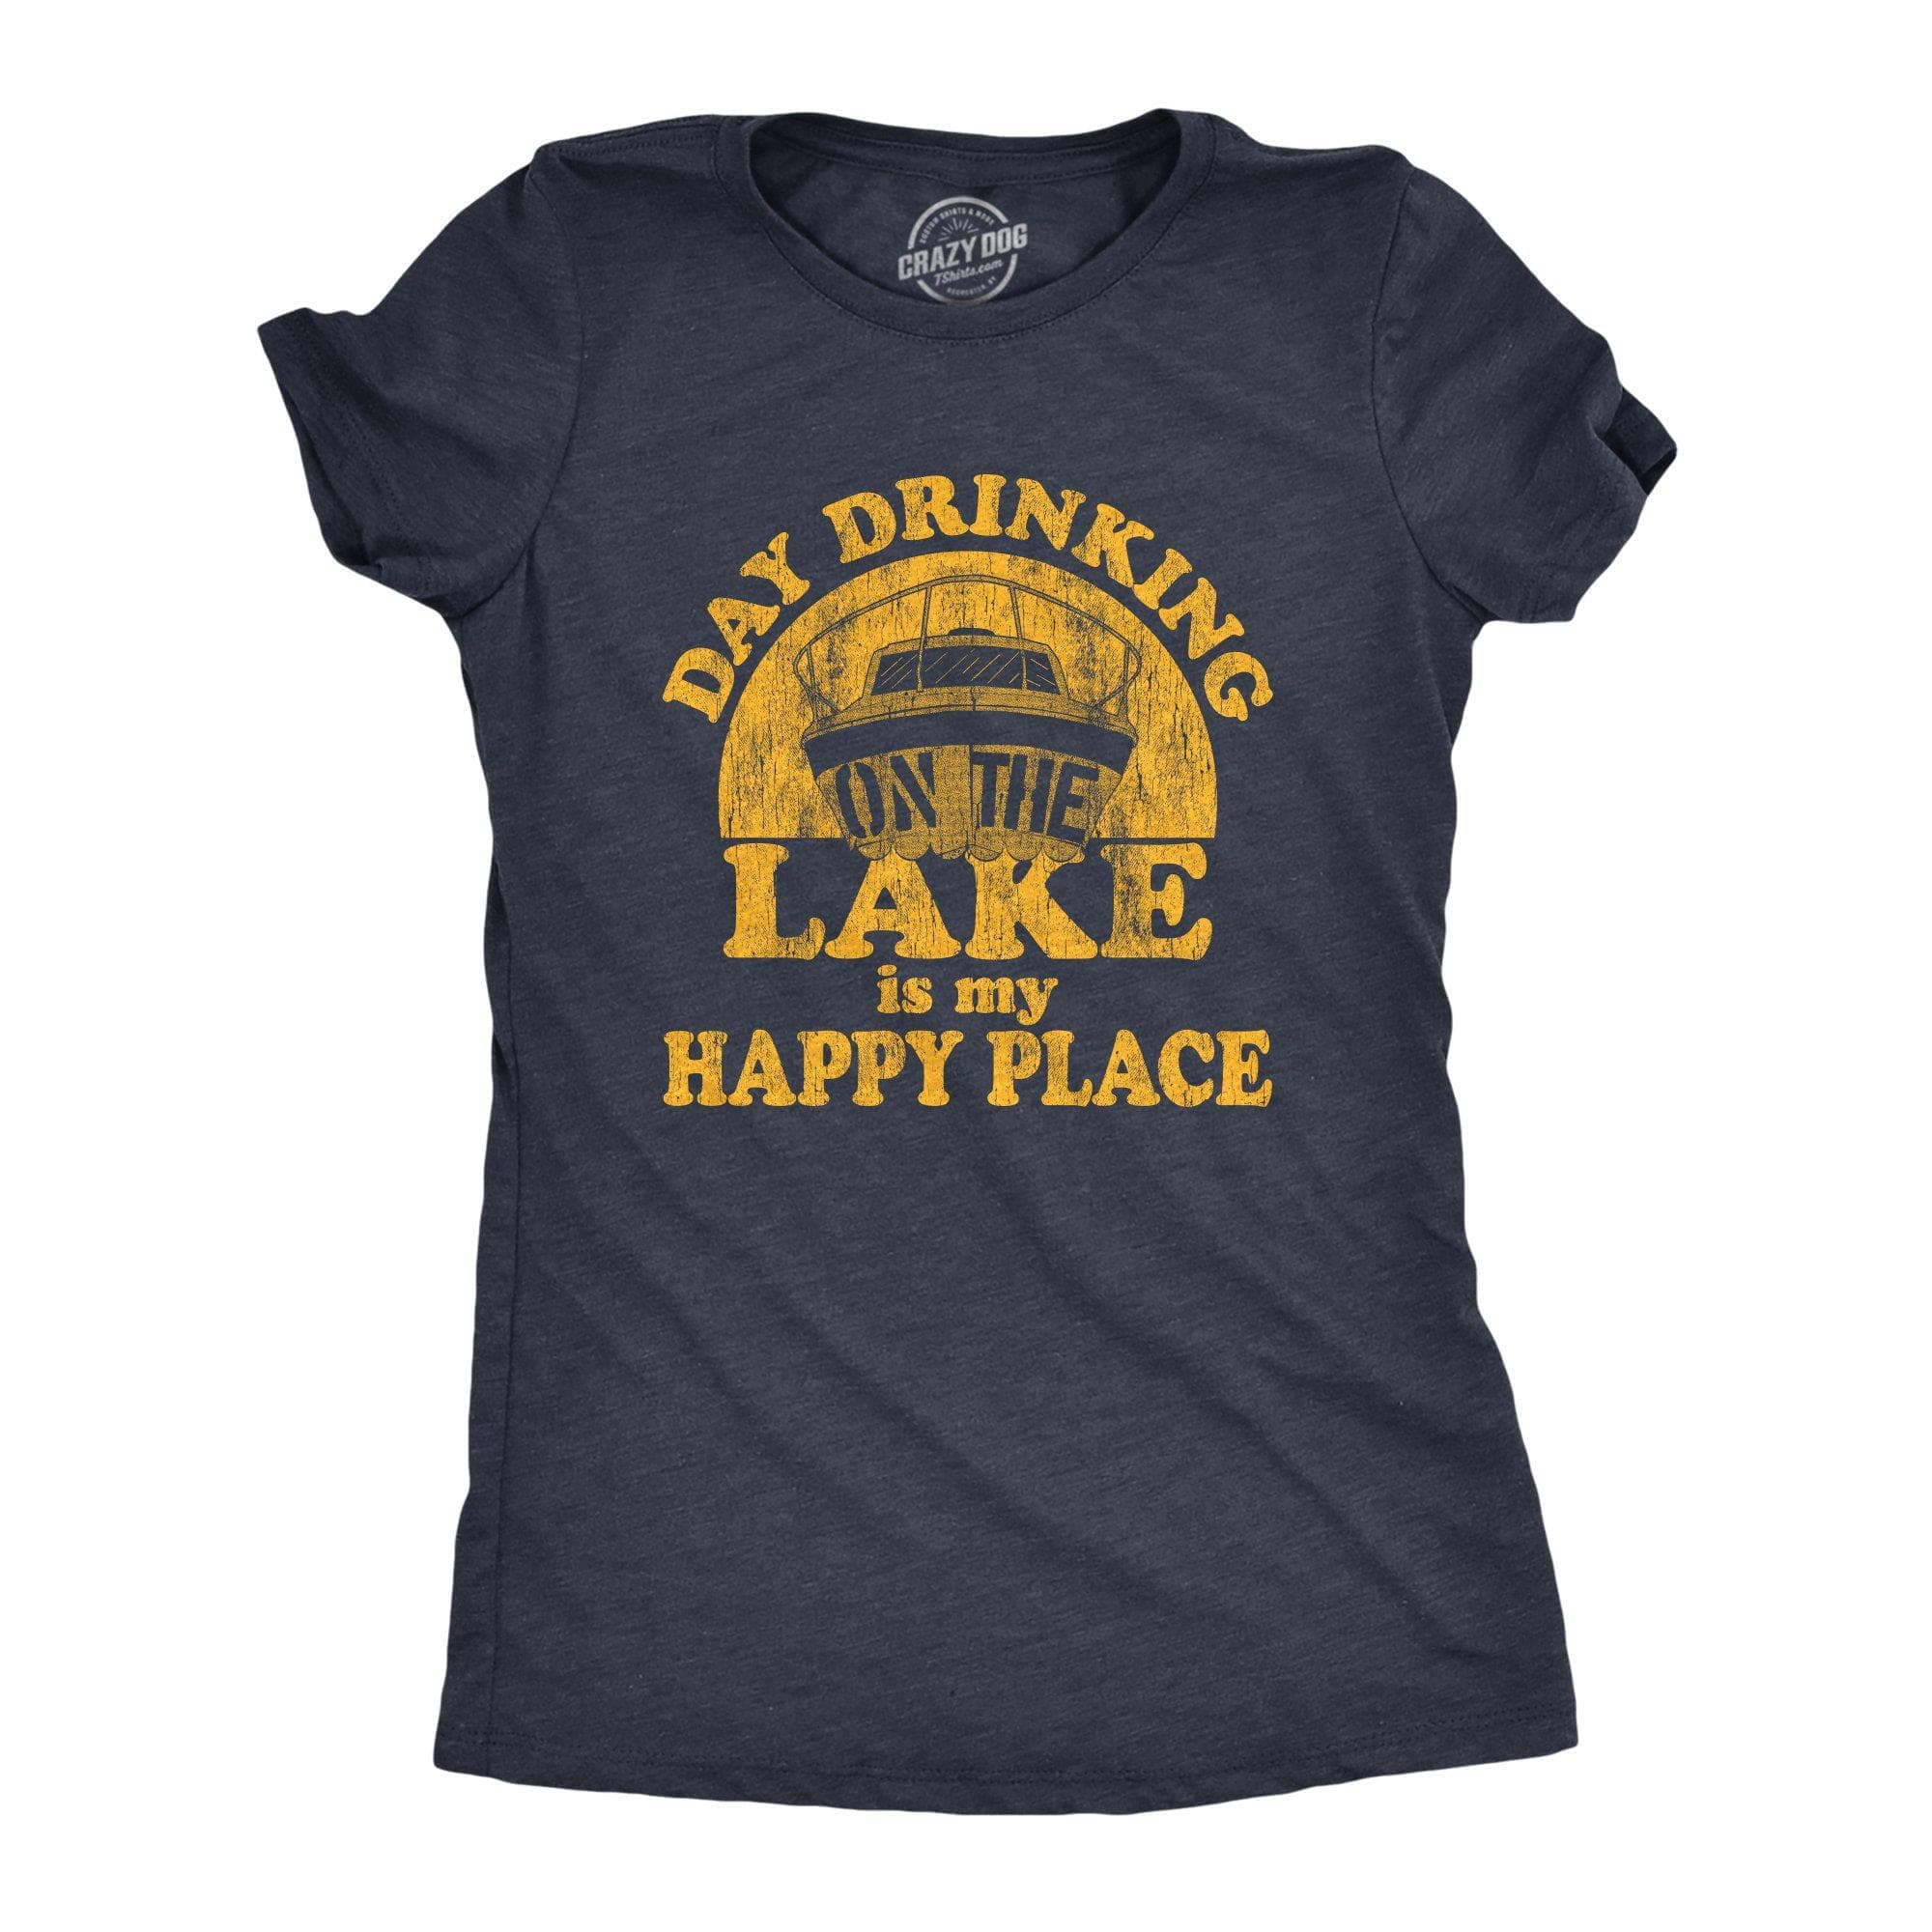 Day Drinking On The Lake Is My Happy Place Women's Tshirt - Crazy Dog T-Shirts